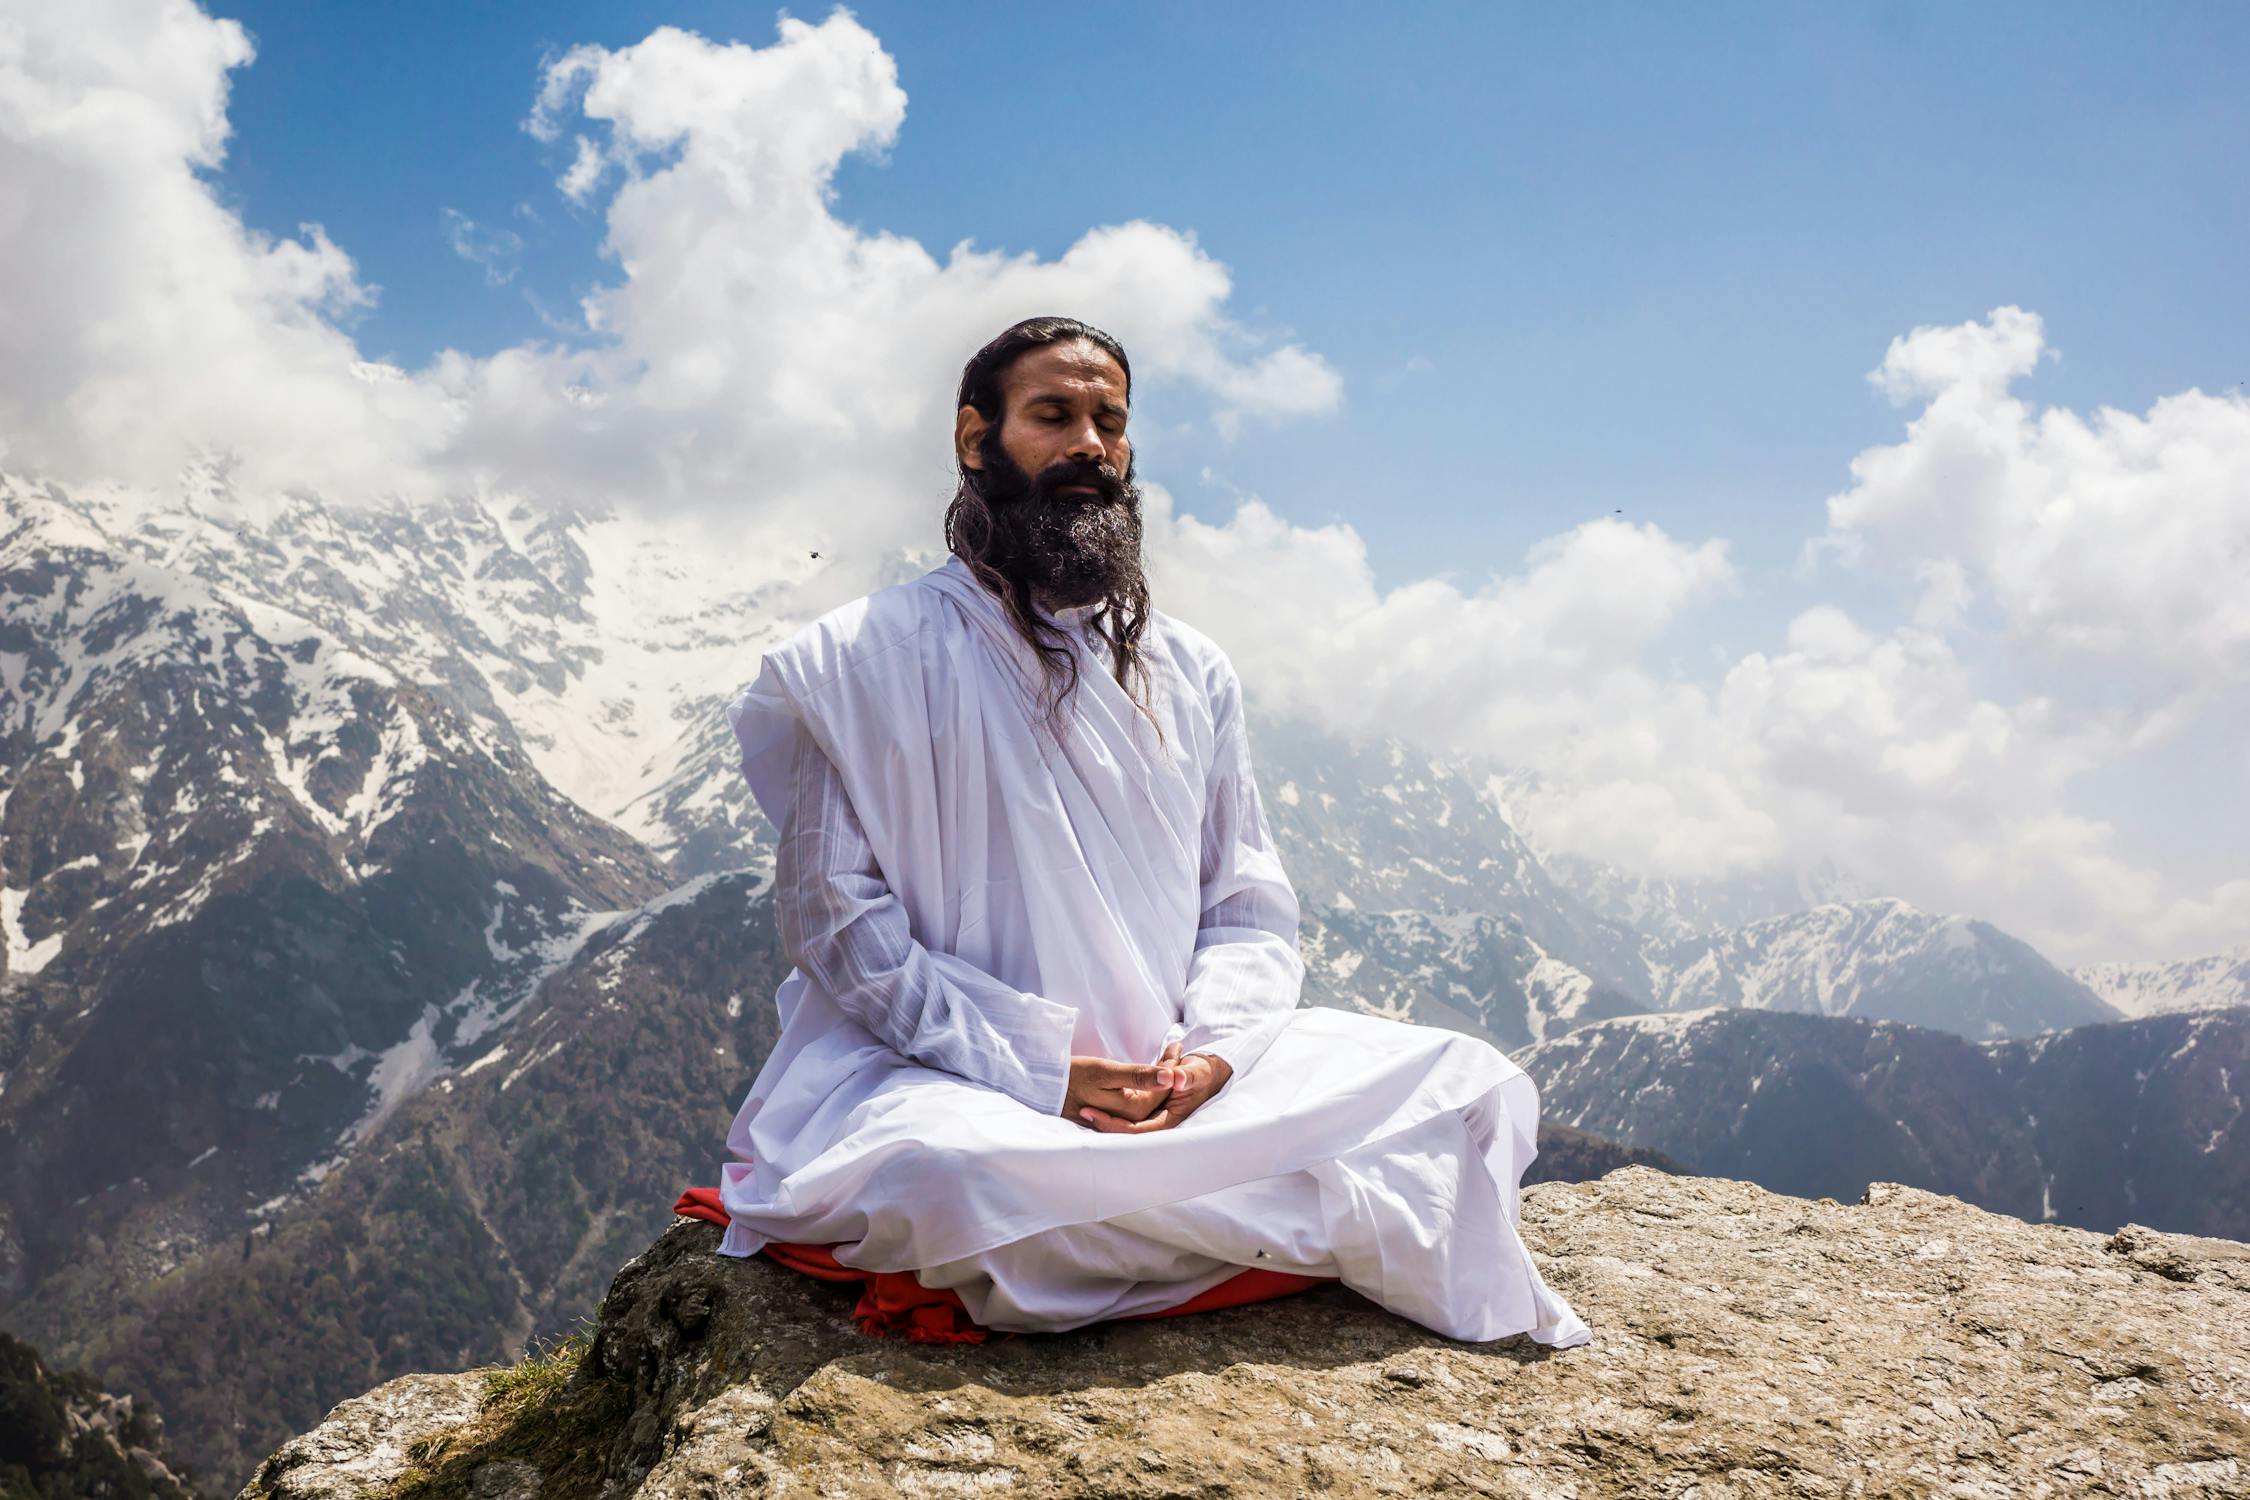 Meditation Photo by Dvine Yoga from Pexels: https://www.pexels.com/photo/a-man-in-white-thobe-meditating-on-the-mountain-top-4340795/